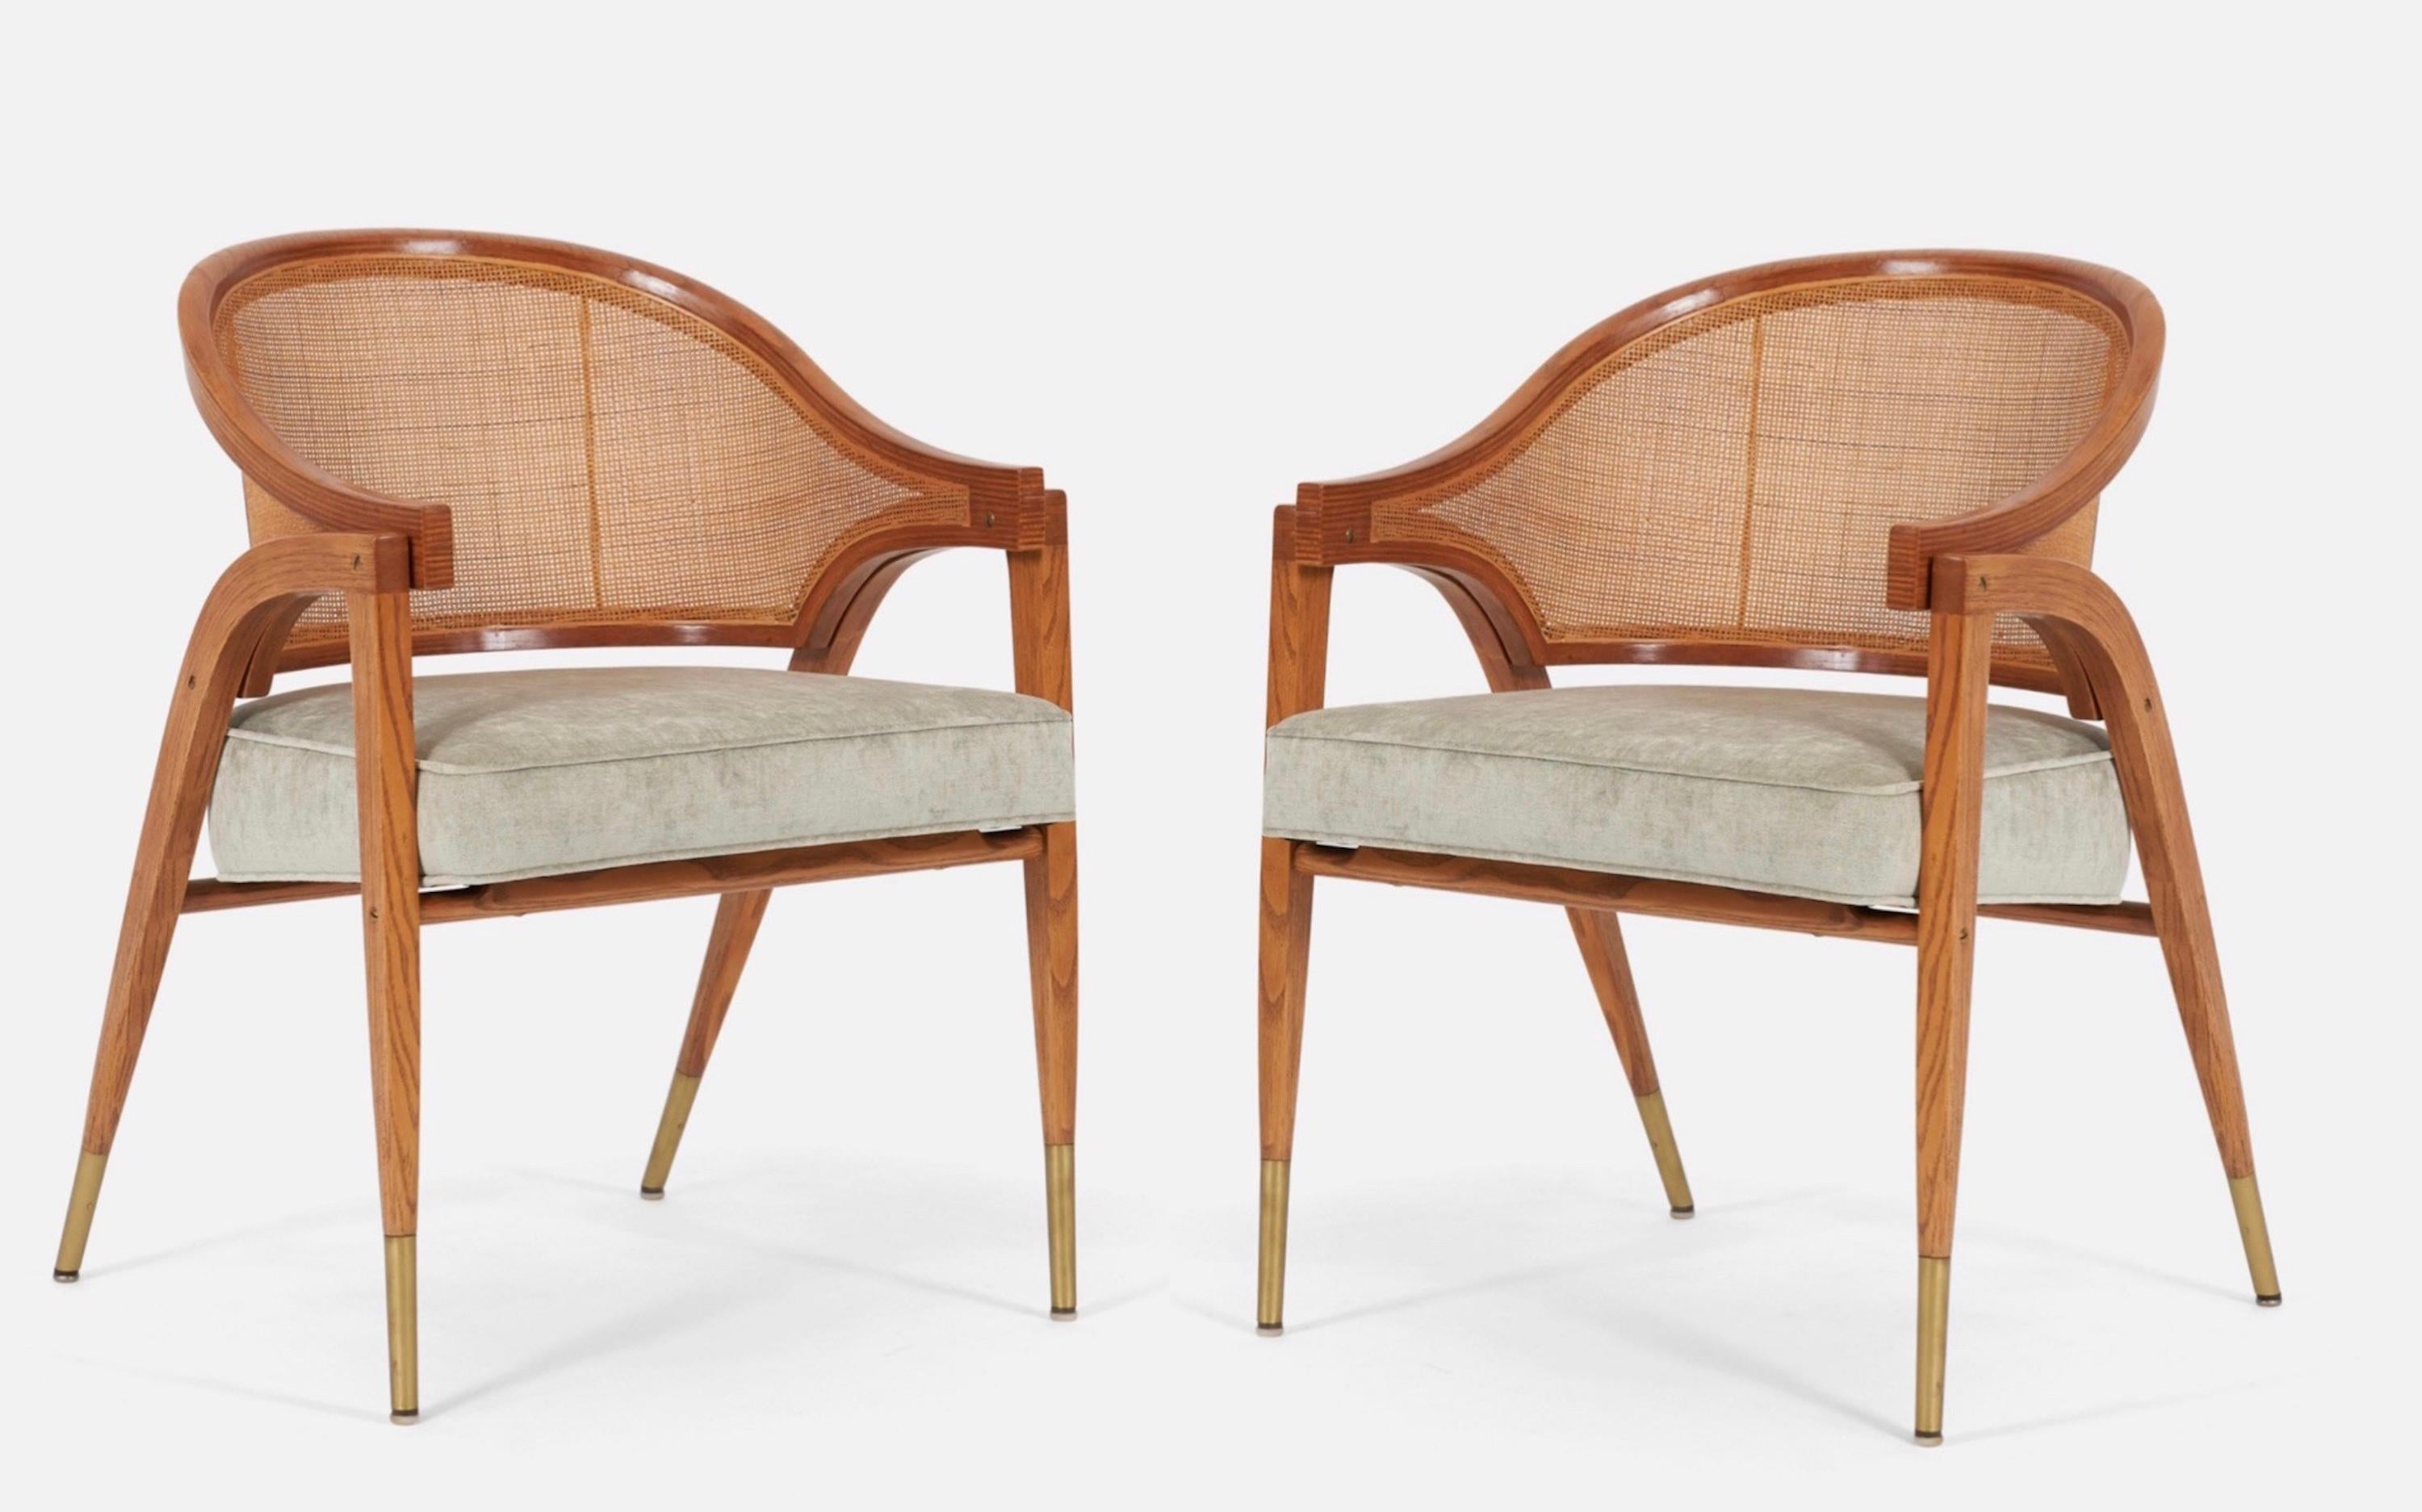 Pair of armchairs designed by Edward Wormley for Dunbar. Sculptural form wood frames with cane backs and brass details.